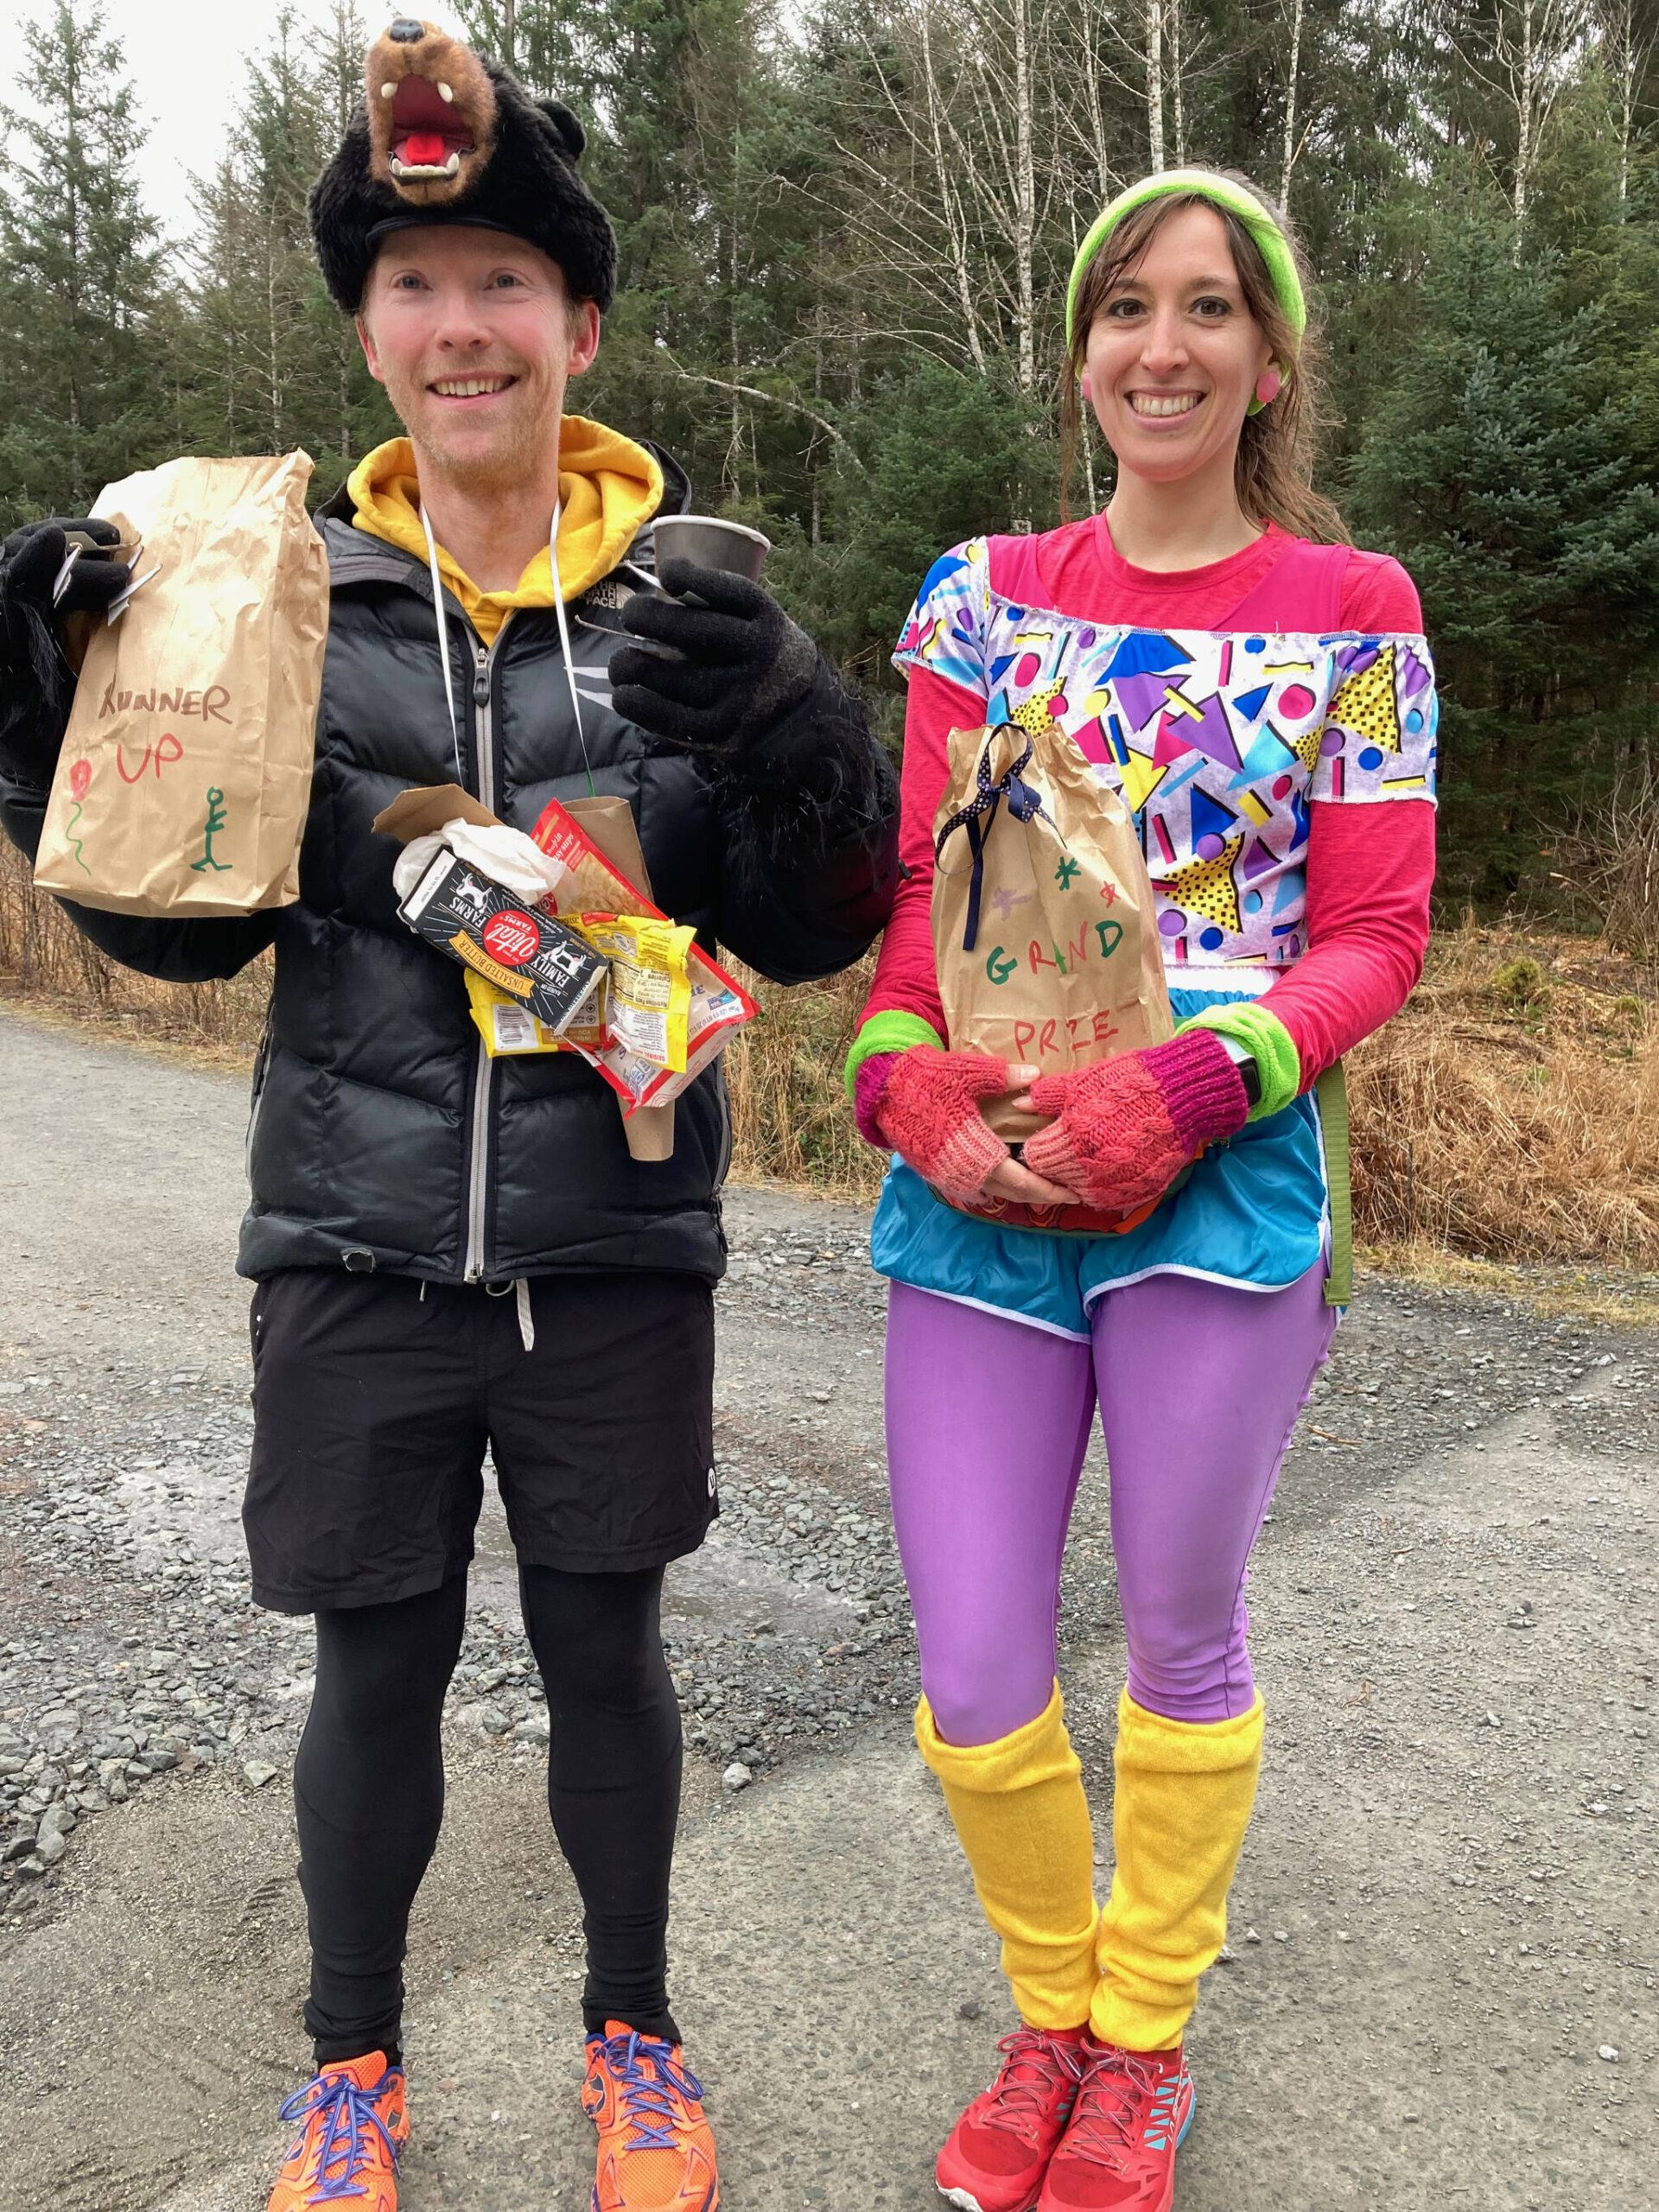 Juneau garbage bear Quinn Tracy, left, was runner up to ‘80s aerobic queen Christy Gentemann, right, for the Costume Contest win during the Halloween Half Marathon on Saturday. (Klas Stolpe for the Juneau Empire)